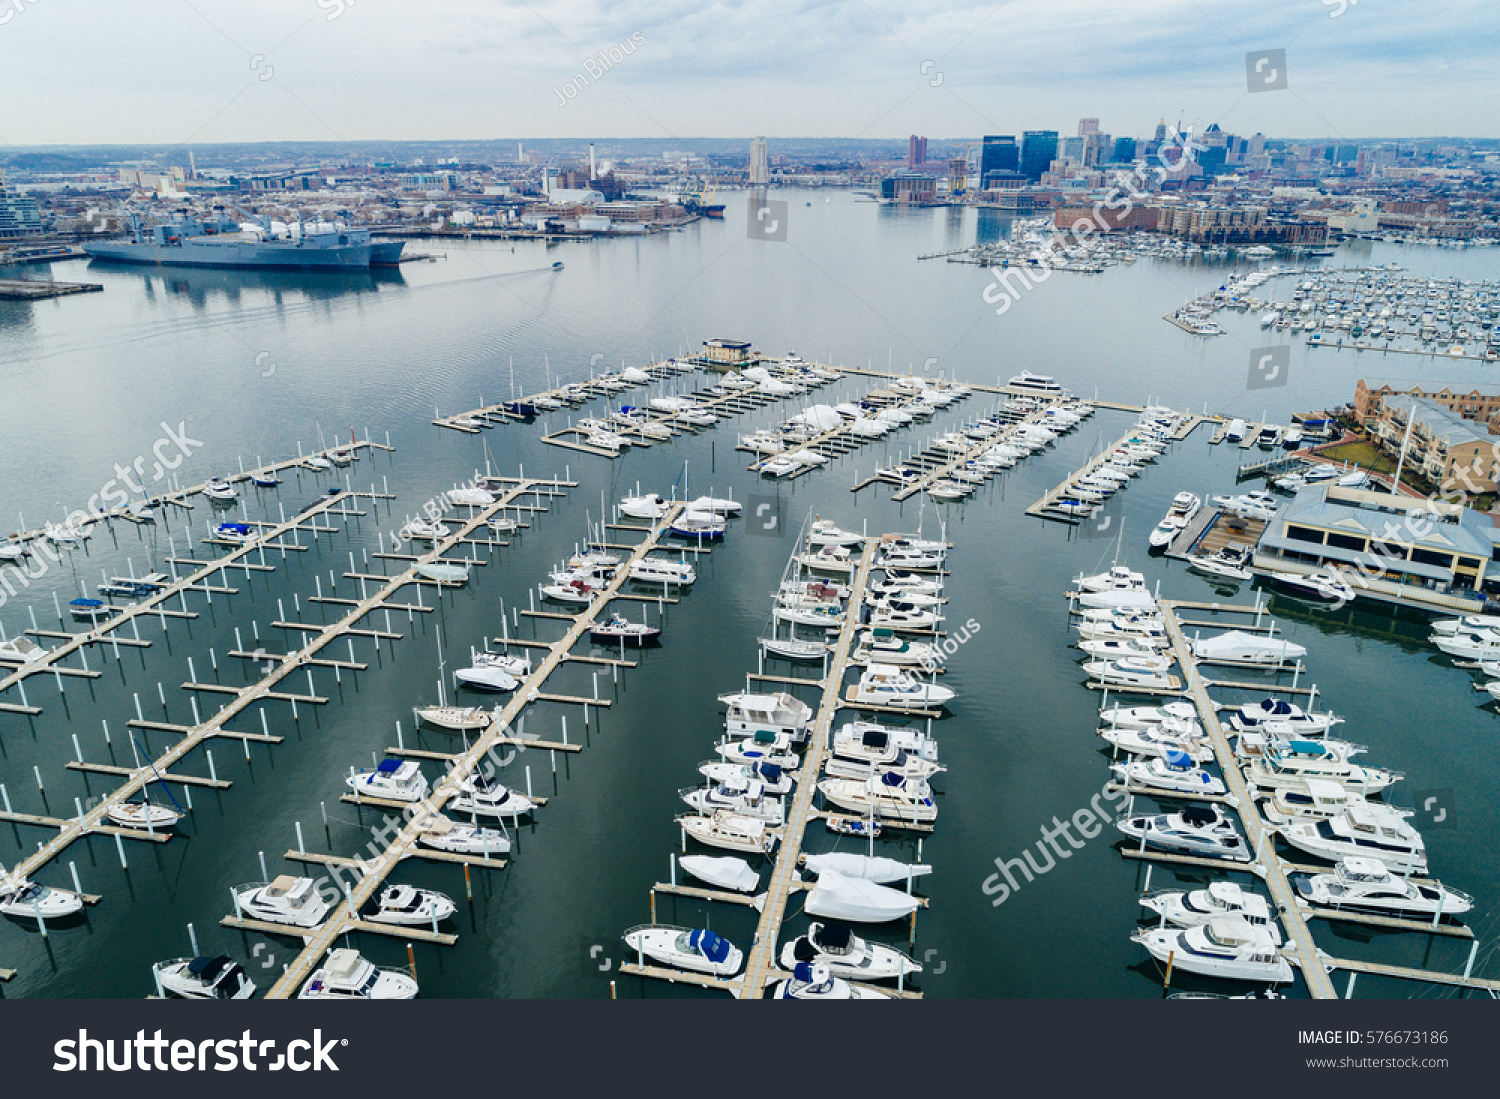 Aerial view of a marina on the Canton waterfront, in Baltimore, Maryland. #576673186